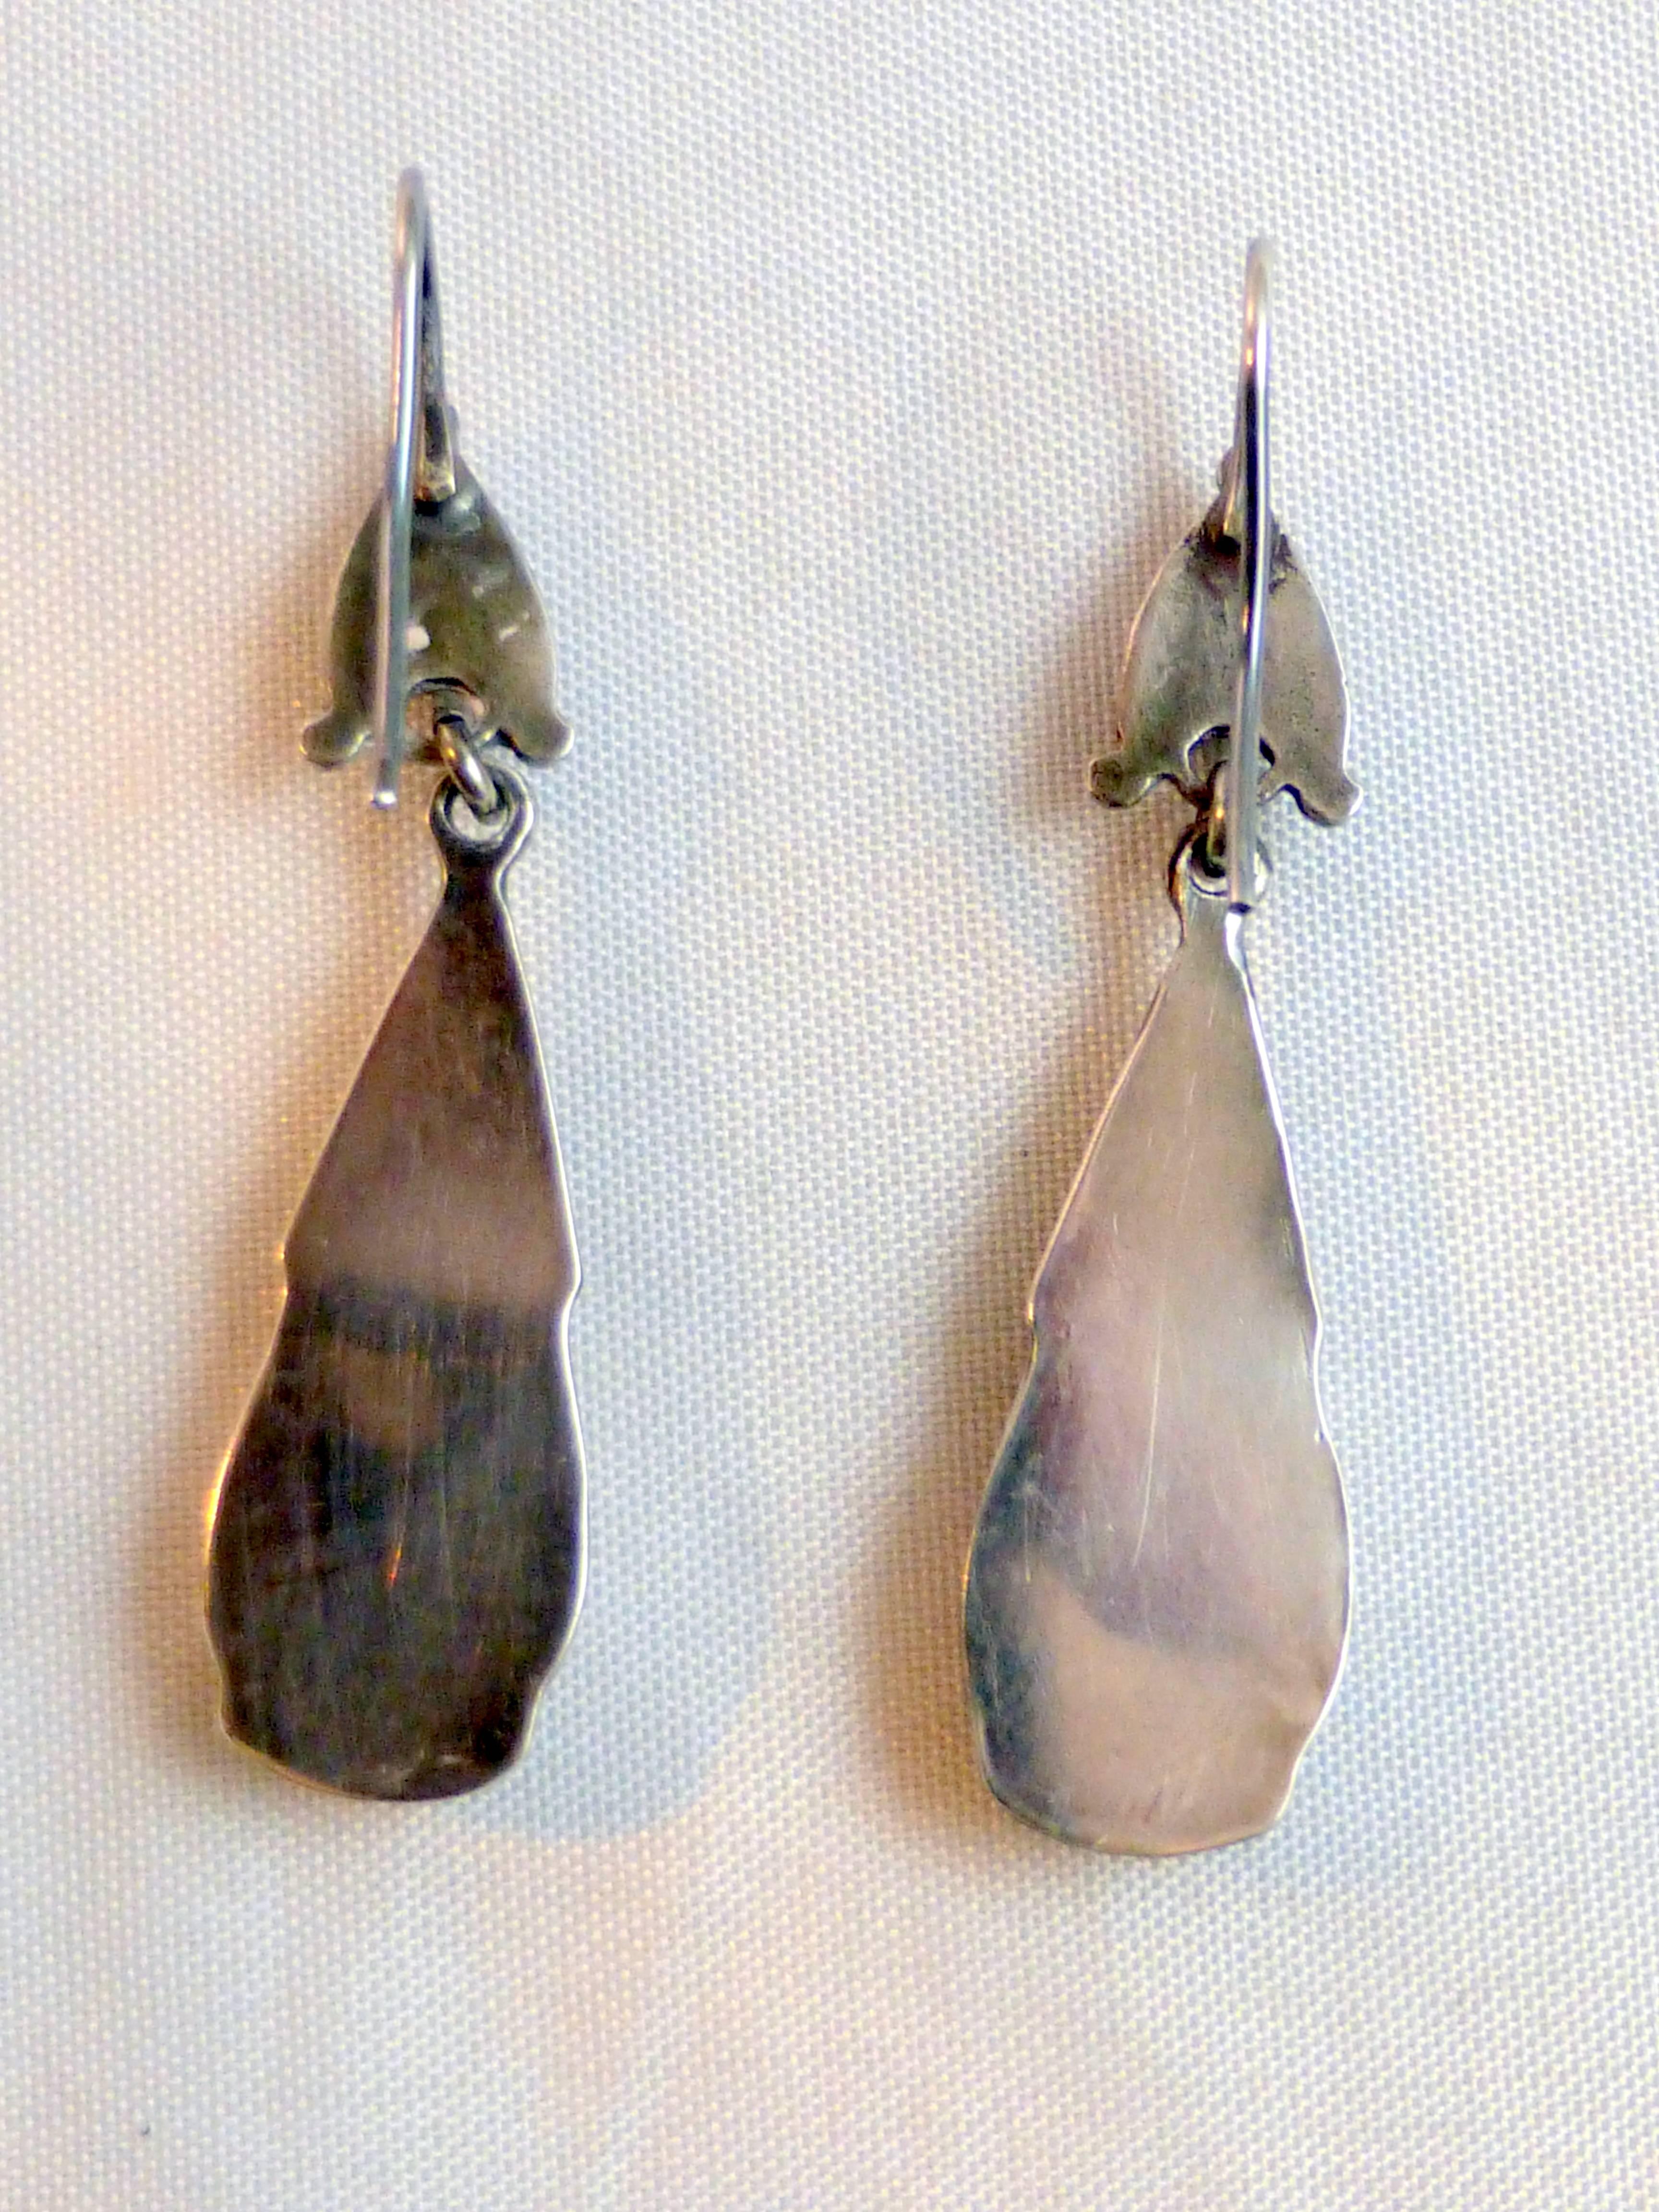 Victorian, sterling silver (unmarked, but tested) - mounted, Scottish agate hanging earrings, Scotland, Ca. 1880's. Without curve of wire, earrings measure @1 1/2